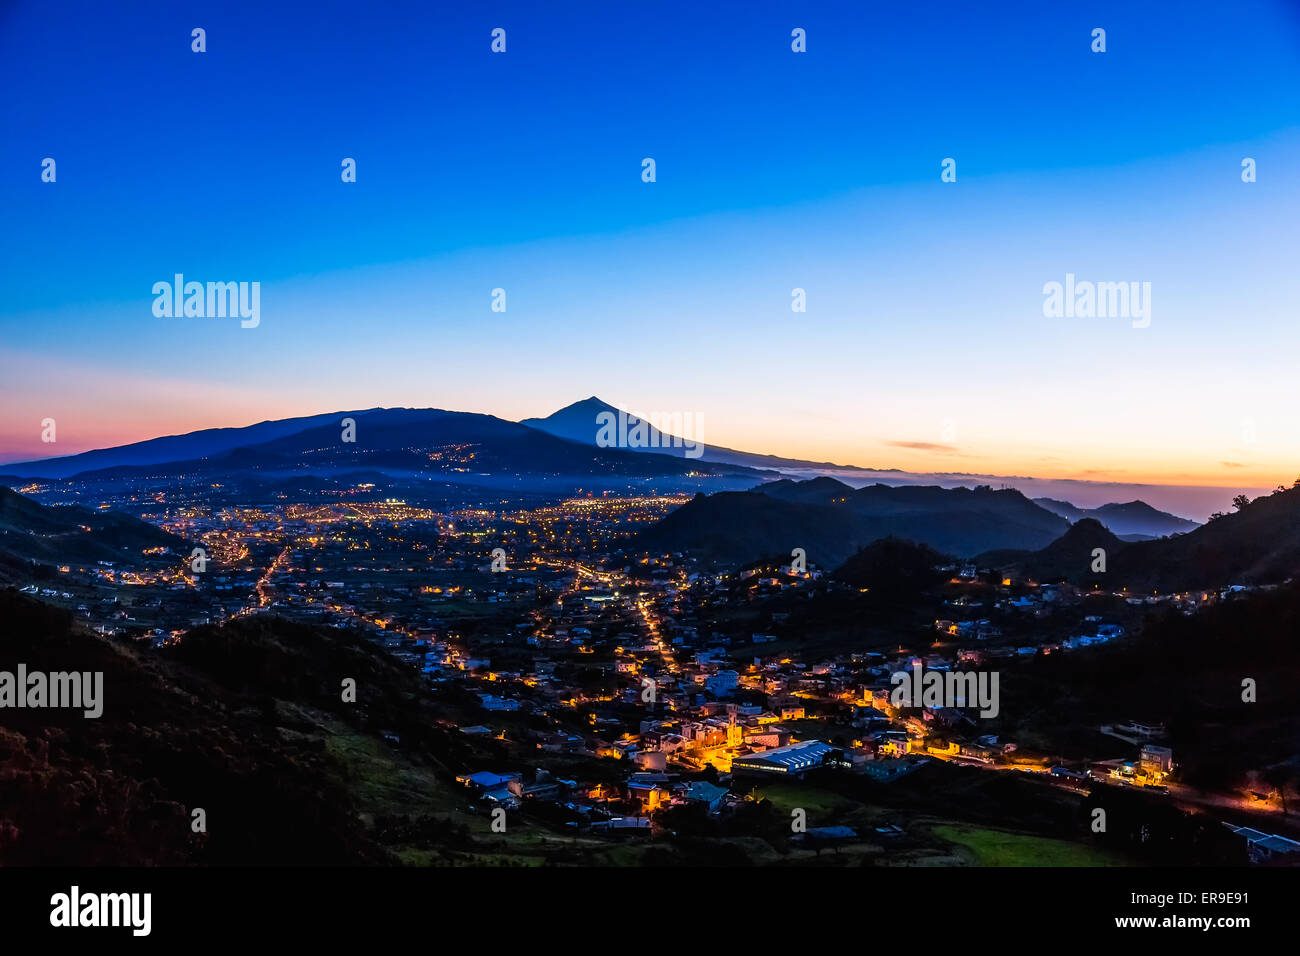 City or town with illumination after sunset or sundown at evening in mountains with blue sky and Teide volcano on background Stock Photo